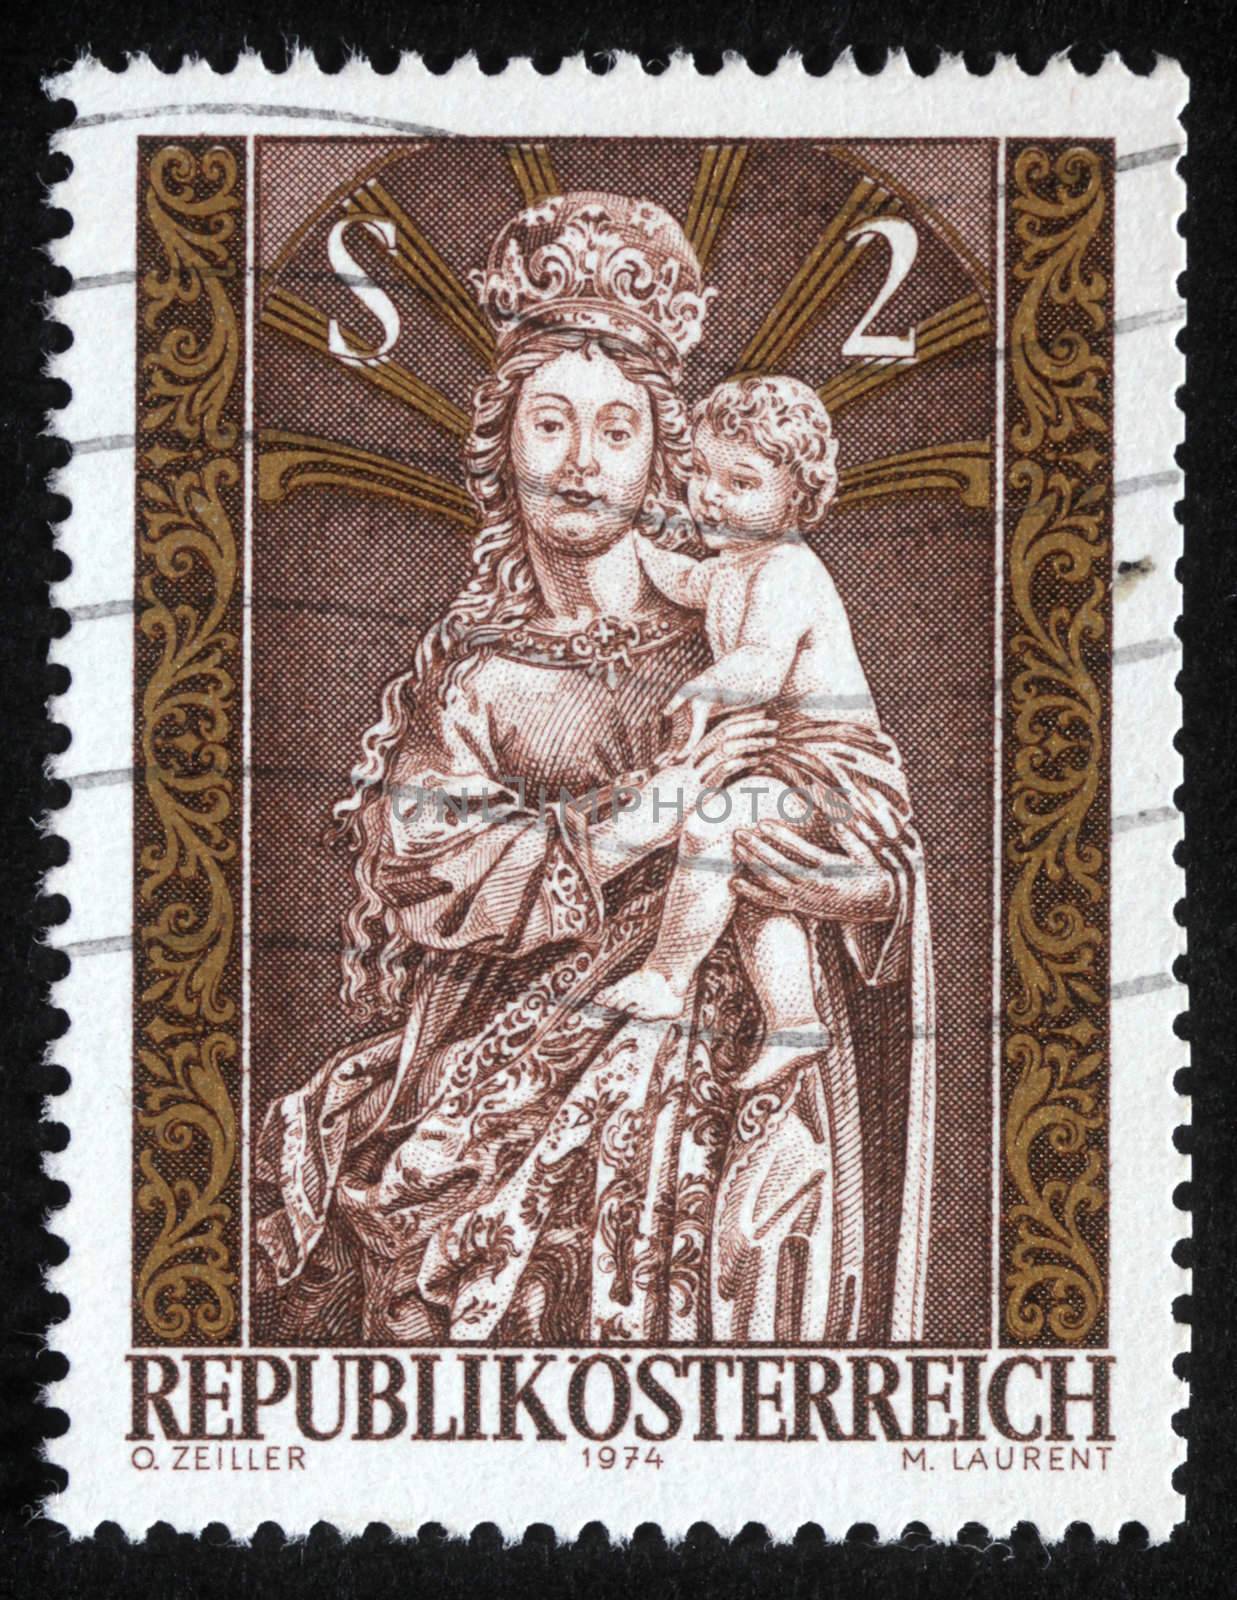 AUSTRIA - CIRCA 1974: A greeting Christmas stamp printed in Austria shows Madonna and Child